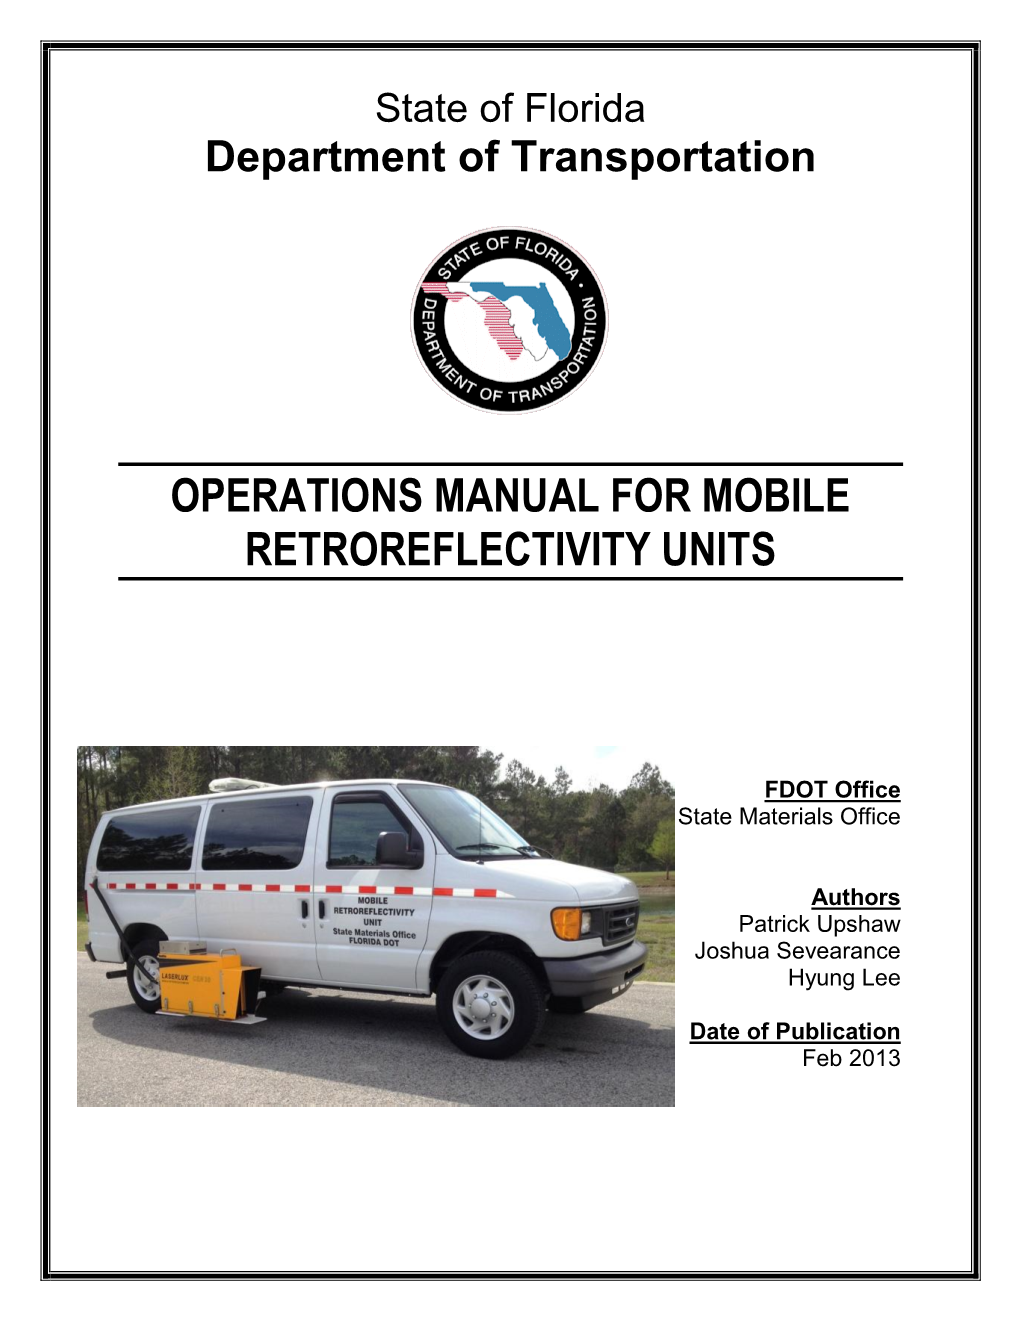 Operations Manual for Mobile Retroreflectivity Units